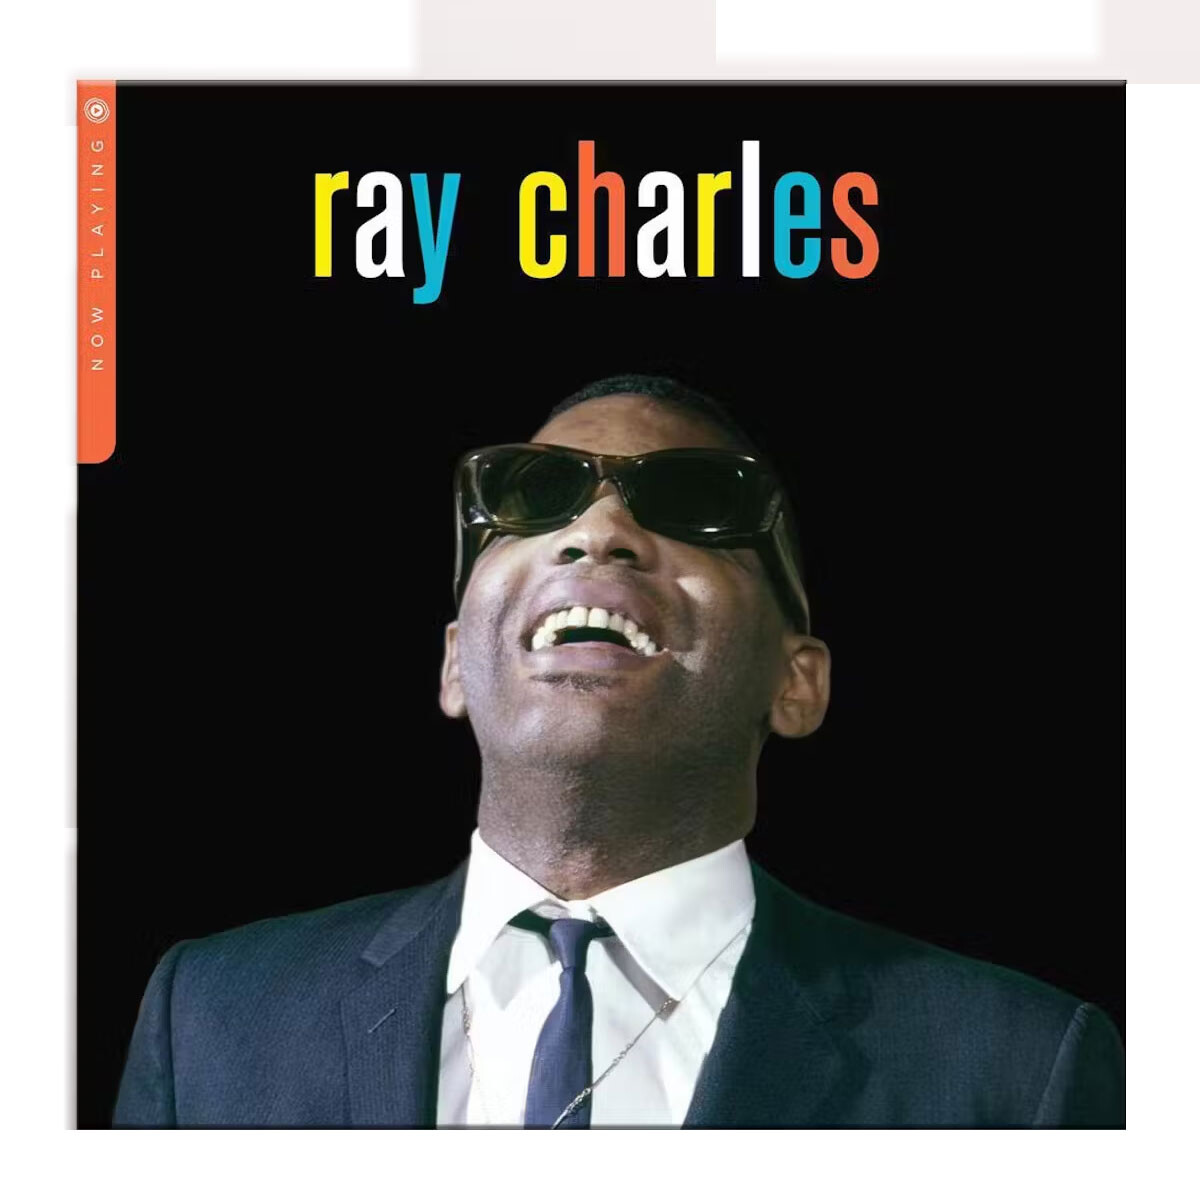 Charles,ray / Now Playing - Lp 